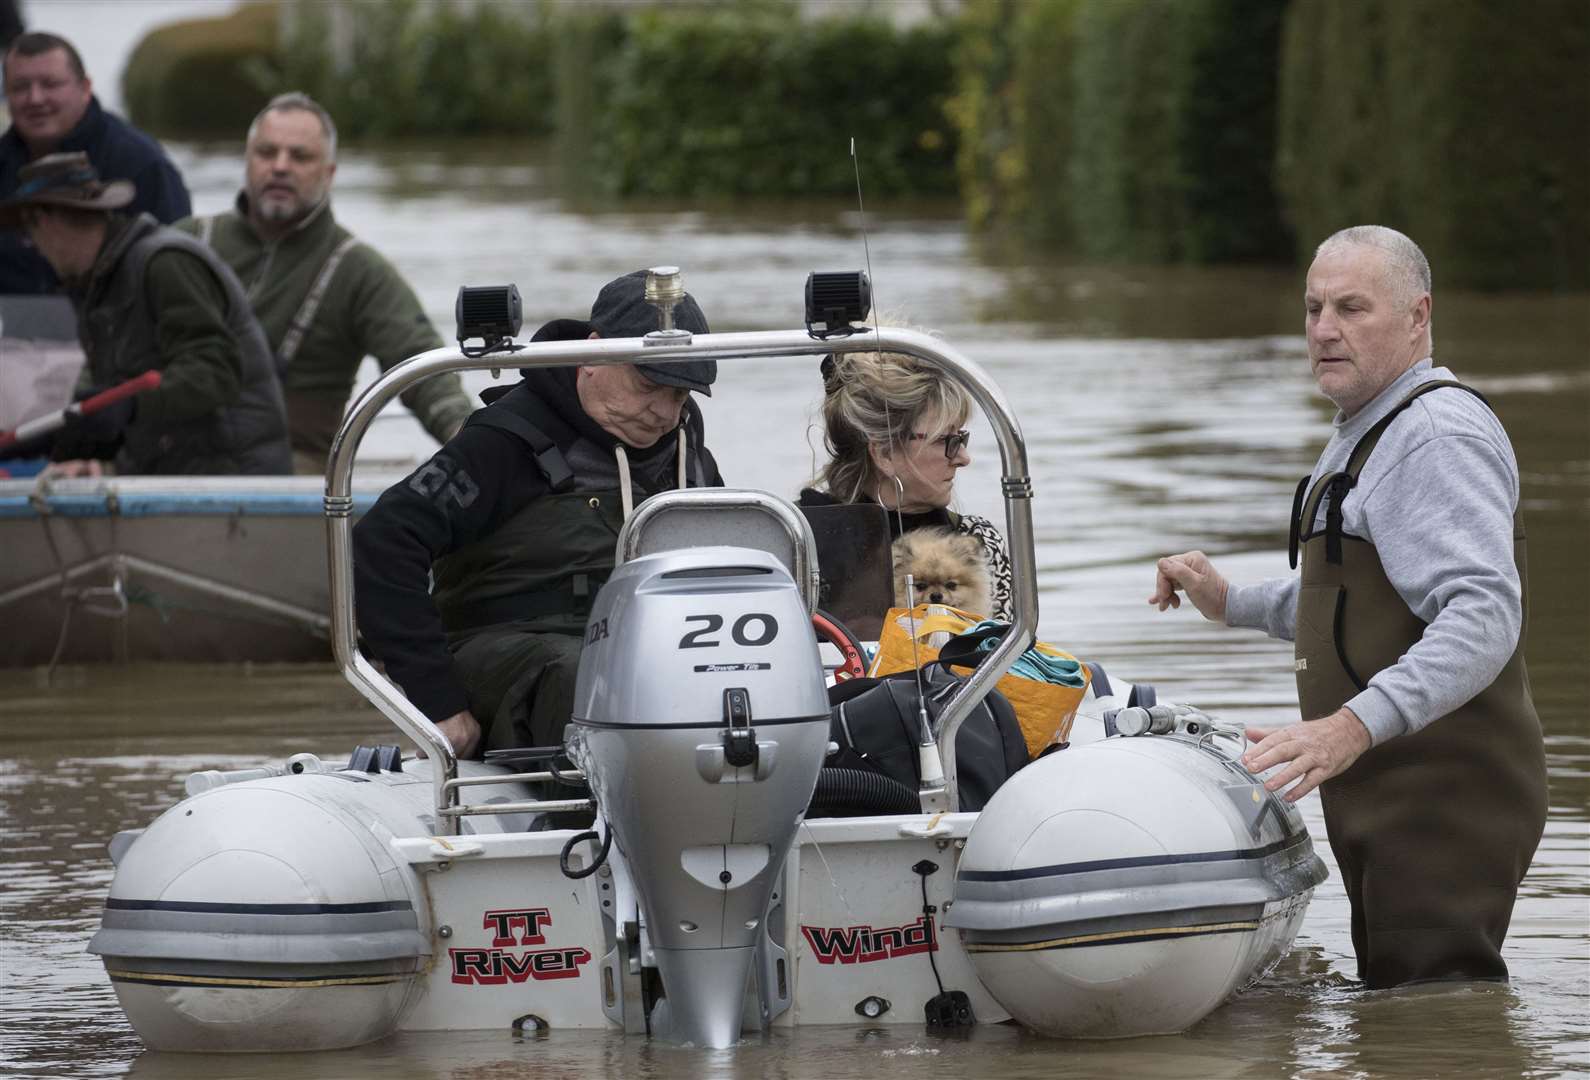 A resident and her dog are ferried by dinghy at the flooded Little Venice Country Park in Yalding. Pic: Stephen Lock/i-Images